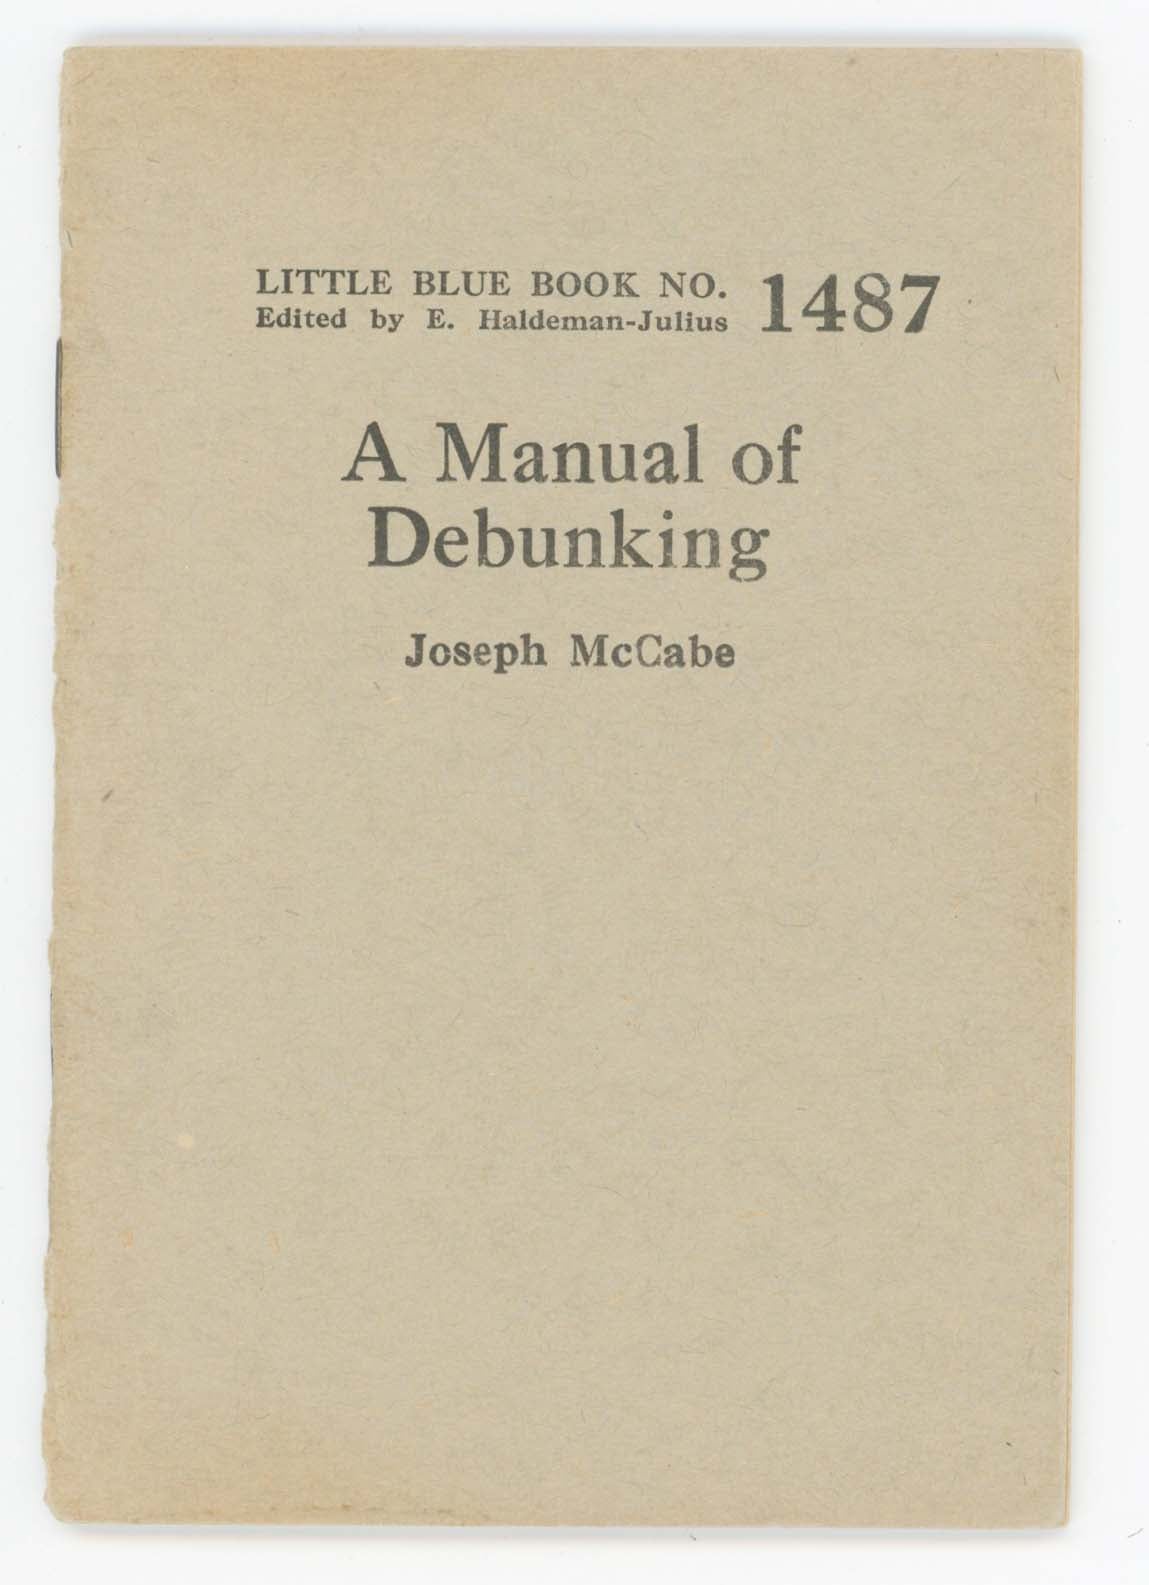 A Manual of Debunking Little Blue Book No. 1487 by Joseph McCabe on  Division Leap